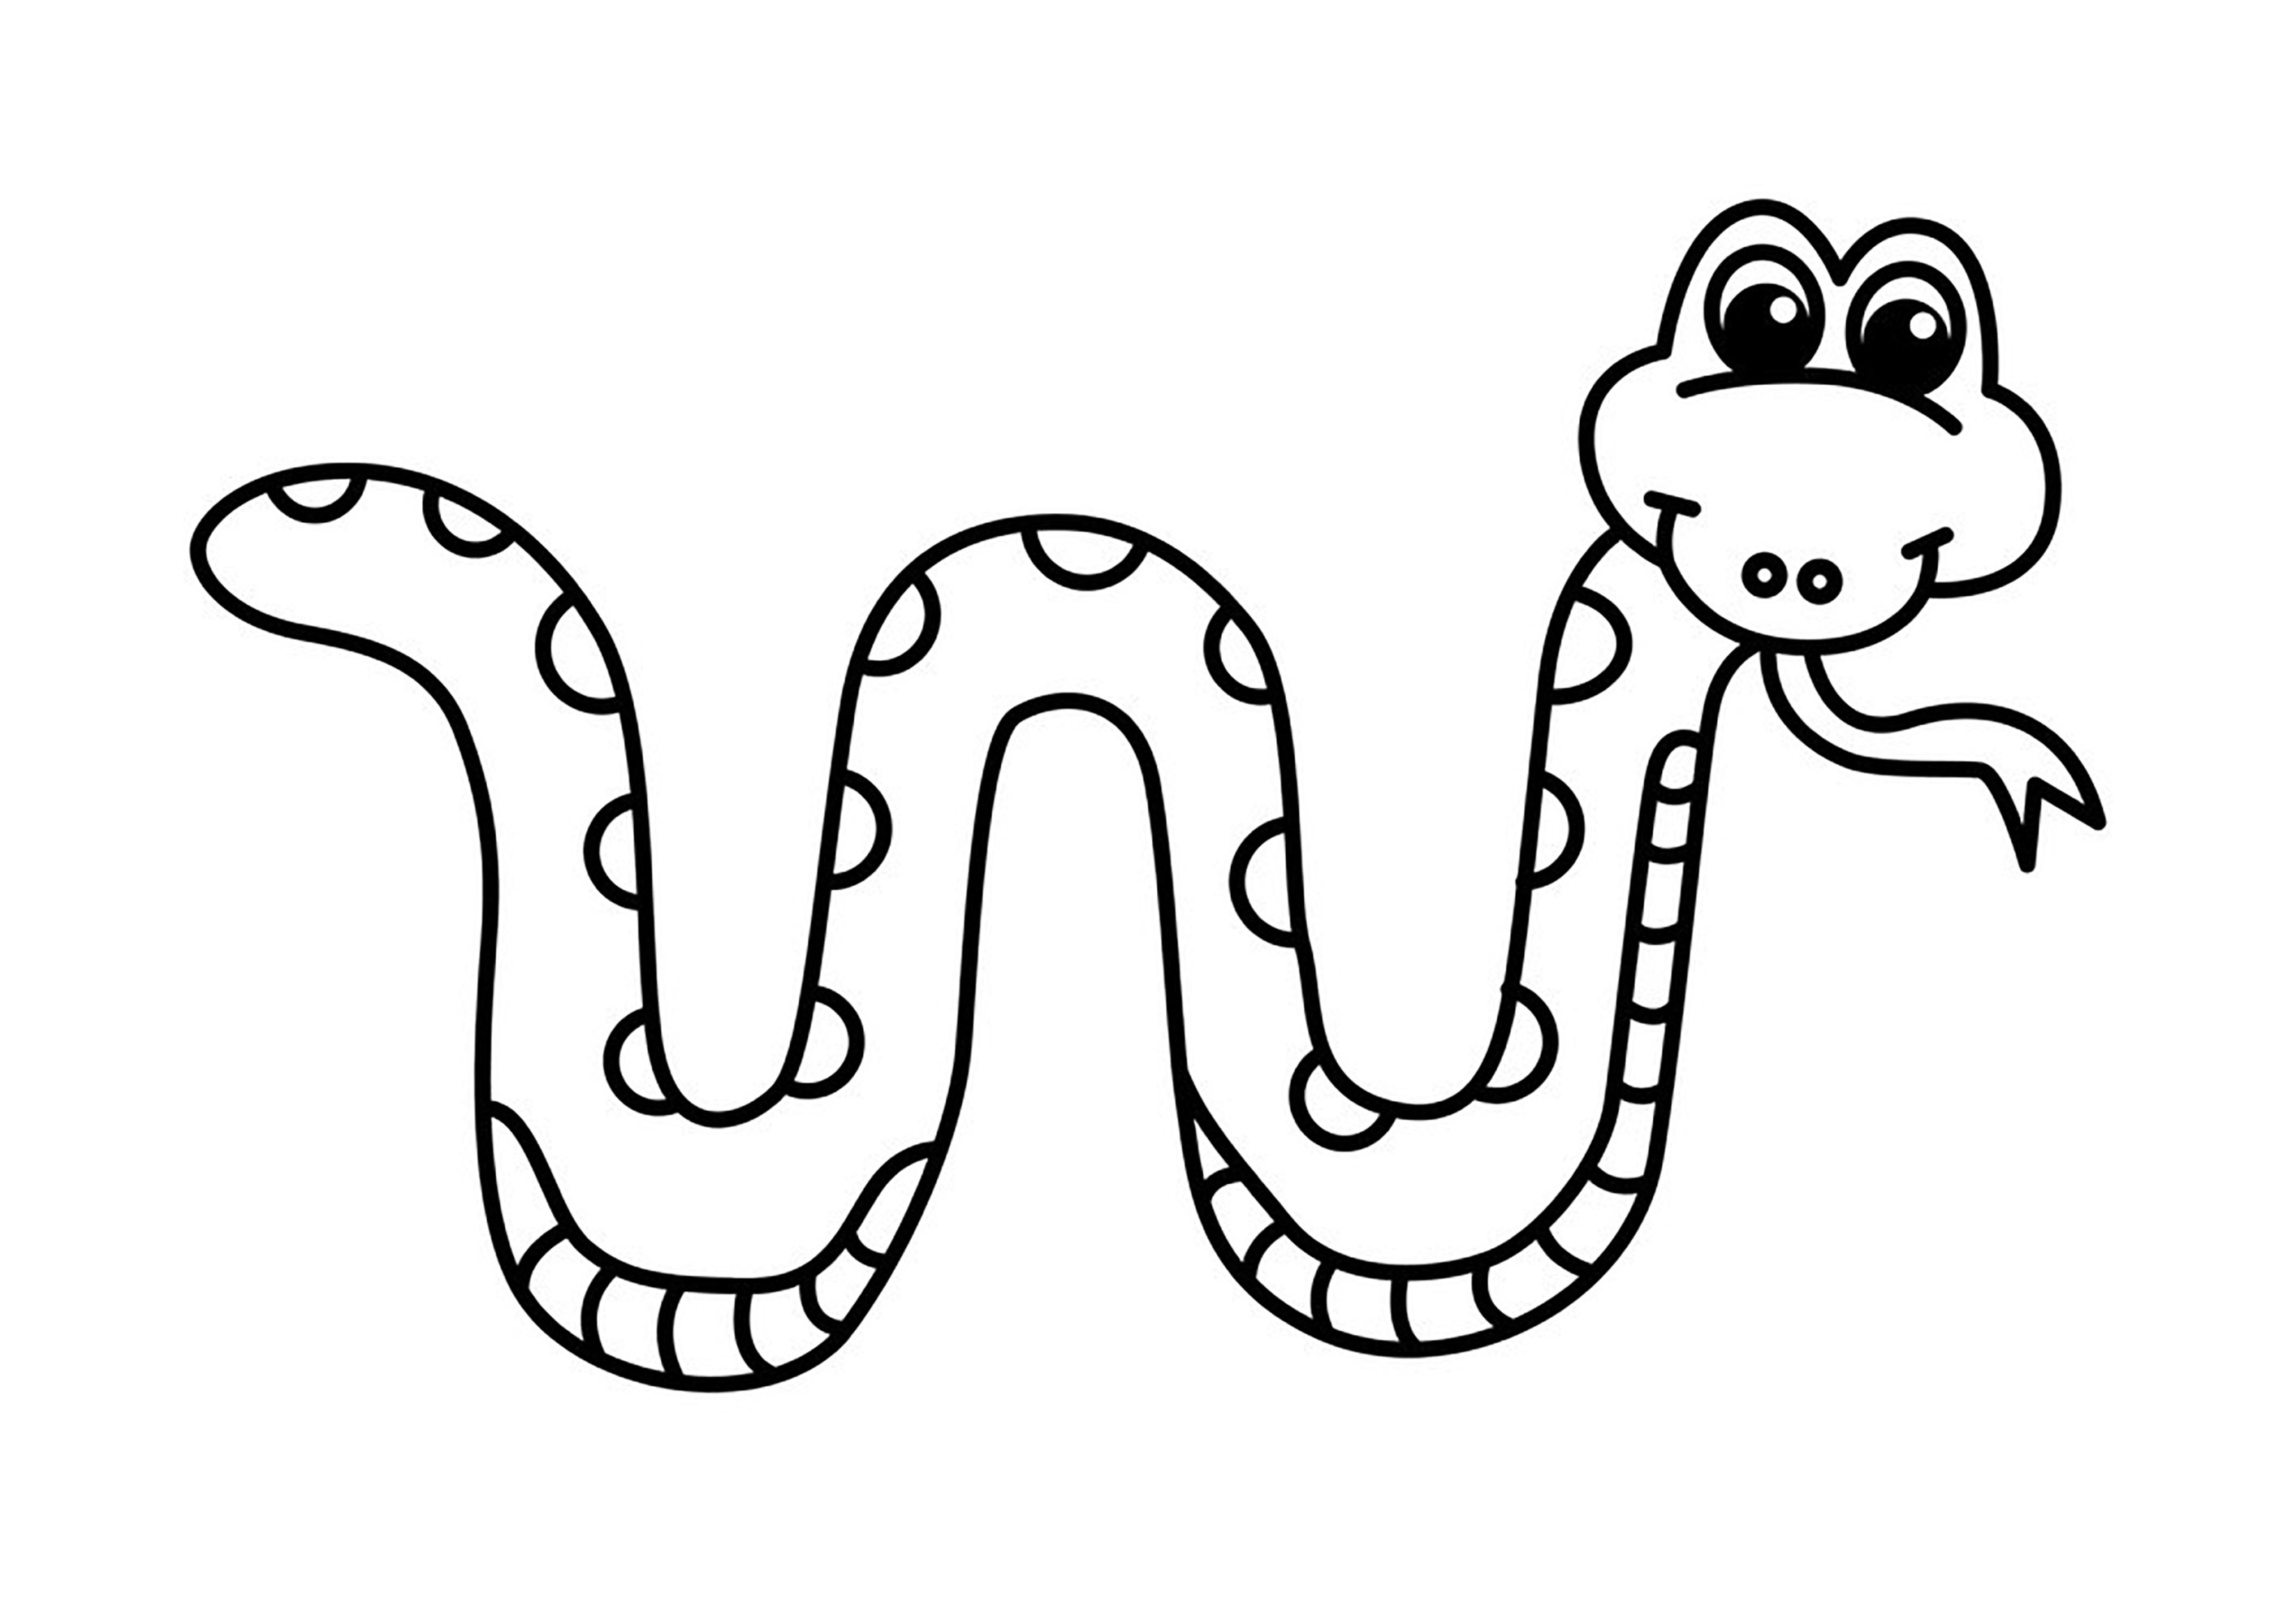 Simple coloring page of a snake sticking out its tongue